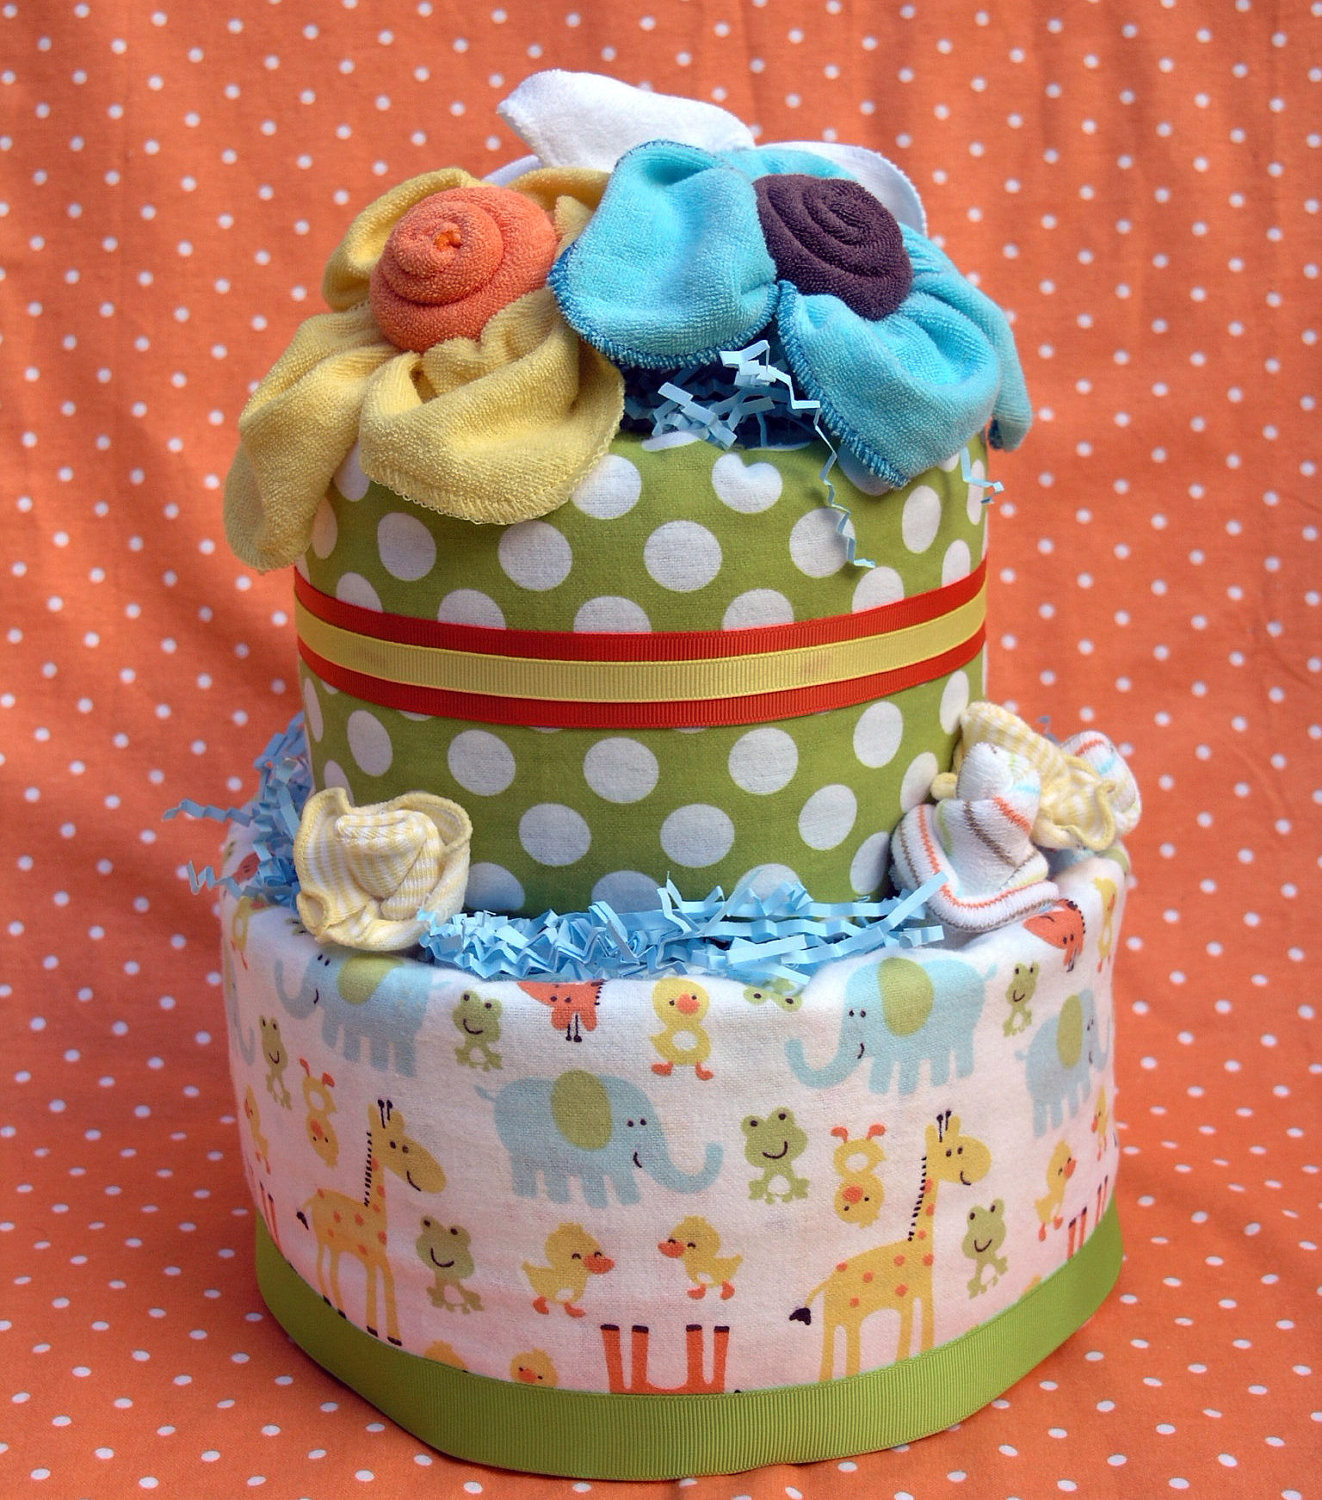 DIY Baby Shower Cake
 DIY Diaper Cakes For Baby Showers